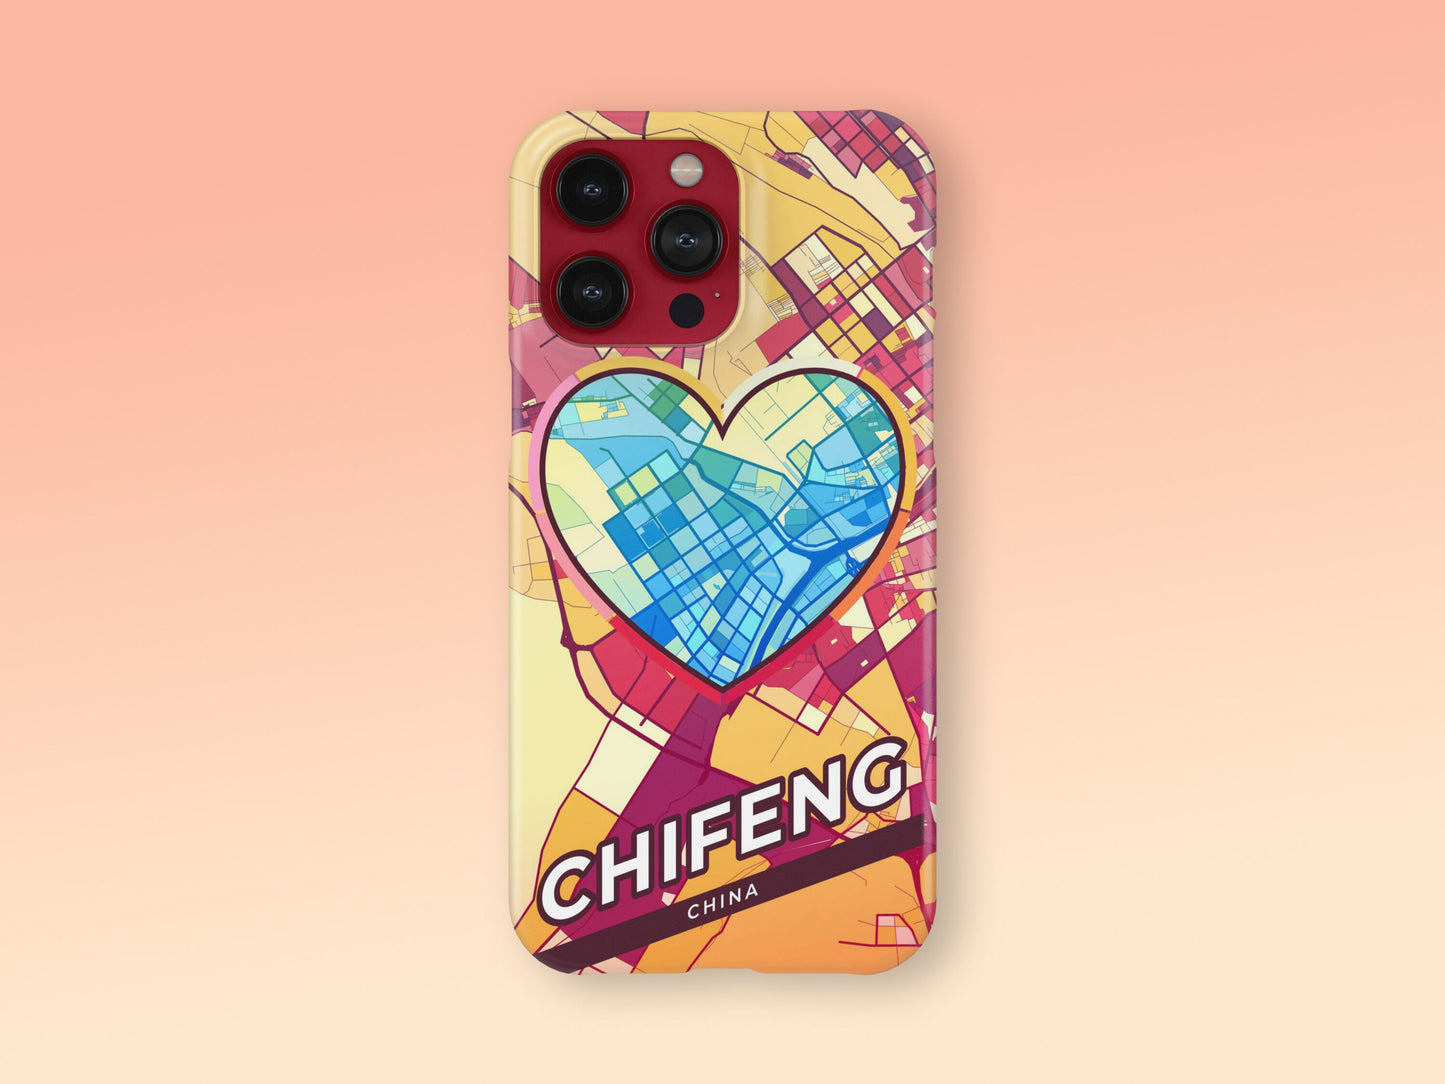 Chifeng China slim phone case with colorful icon. Birthday, wedding or housewarming gift. Couple match cases. 2